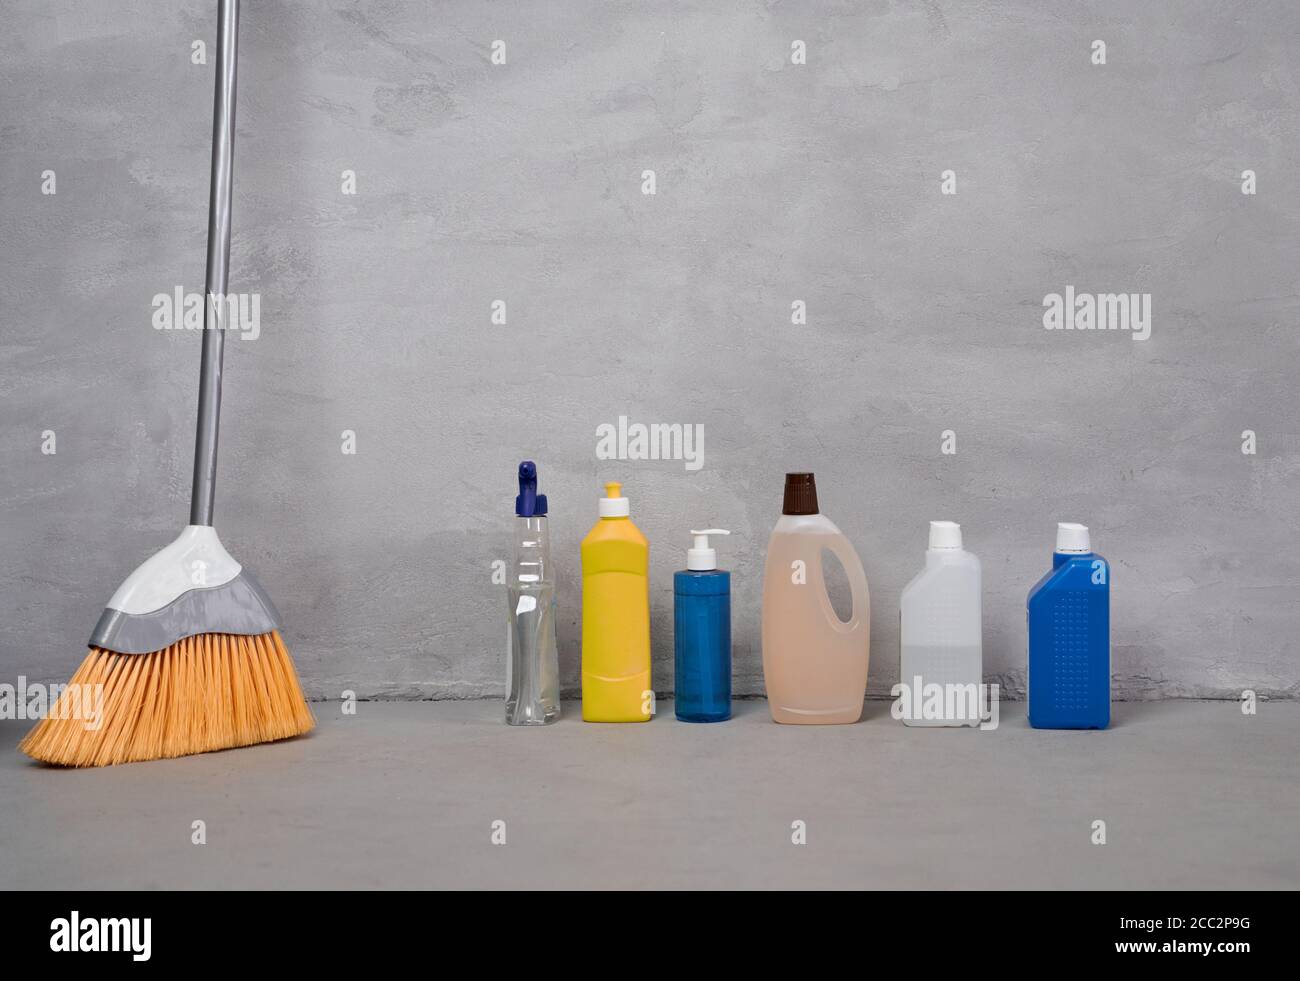 Home cleaning products and tools. Broom, bottles with different detergents standing on the floor against grey wall. Housework, house cleaning and disinfection, housekeeping Stock Photo